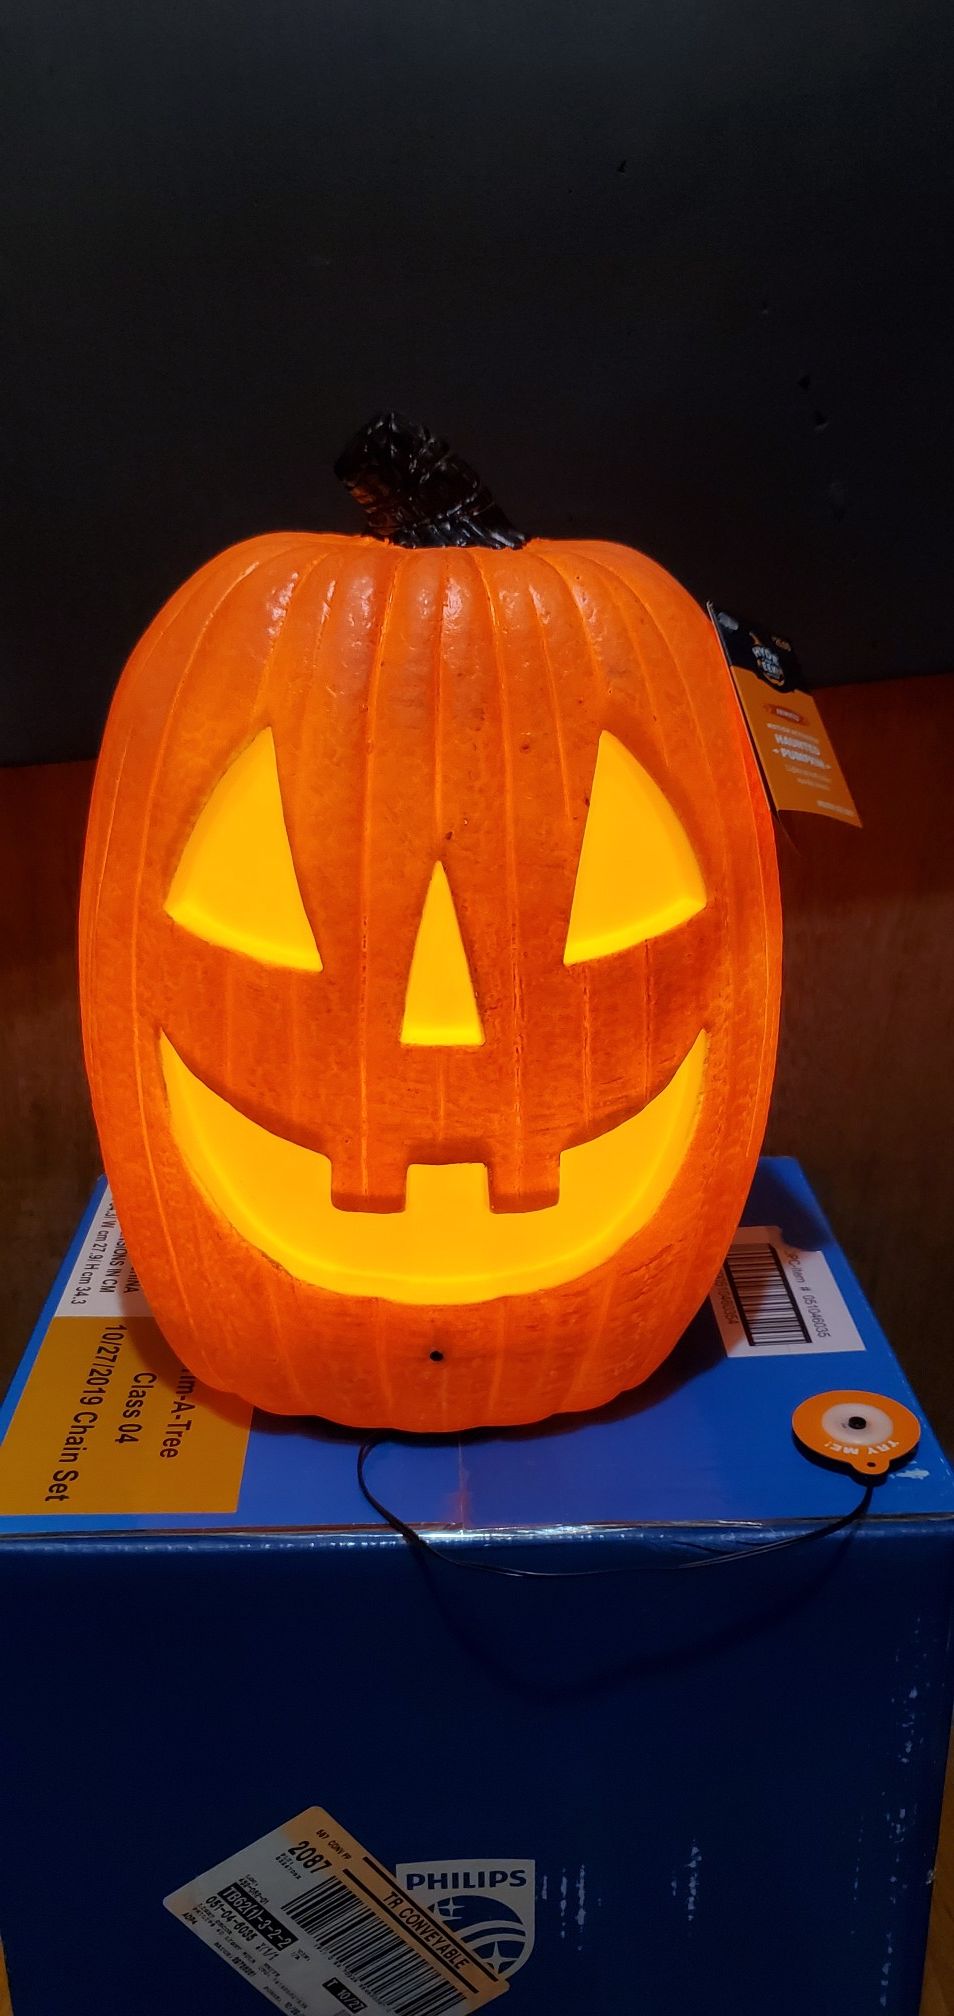 New Pumpkin Light Up With Spooky Sound see 4 pictures show shape